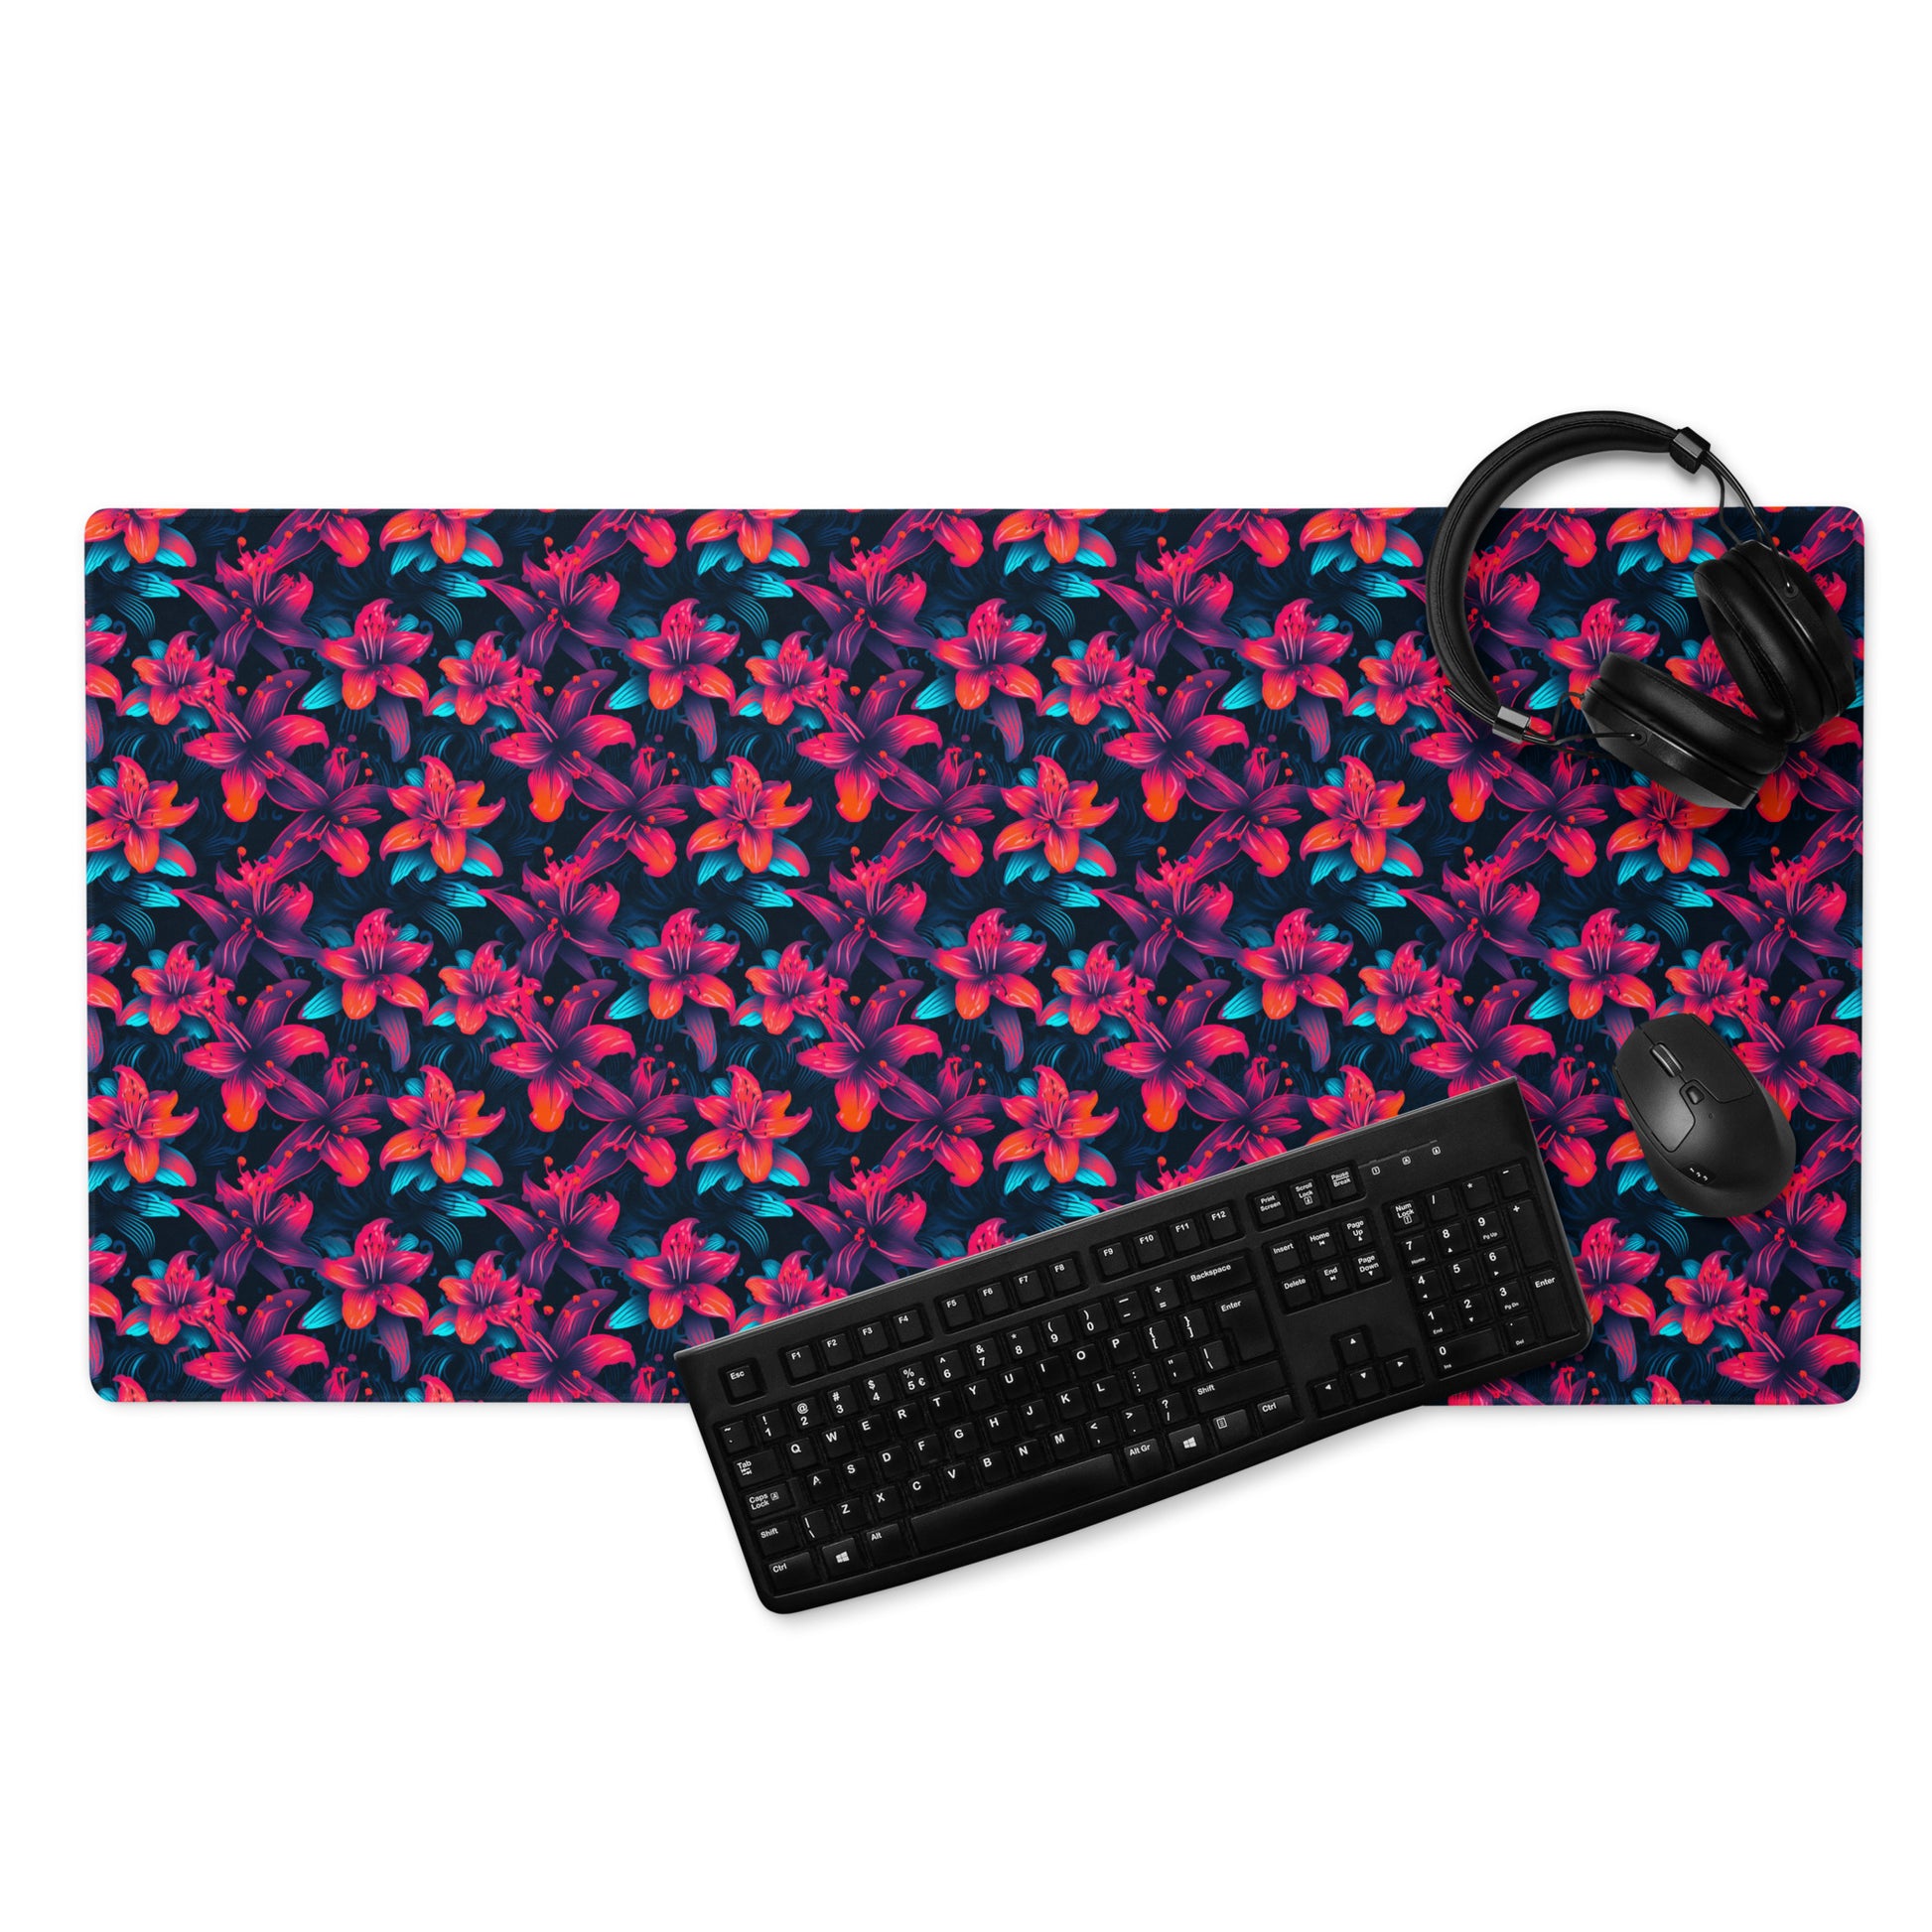 A 36" x 18" desk pad with a neon red and blue floral pattern. With a keyboard, mouse, and headphones sitting on it.